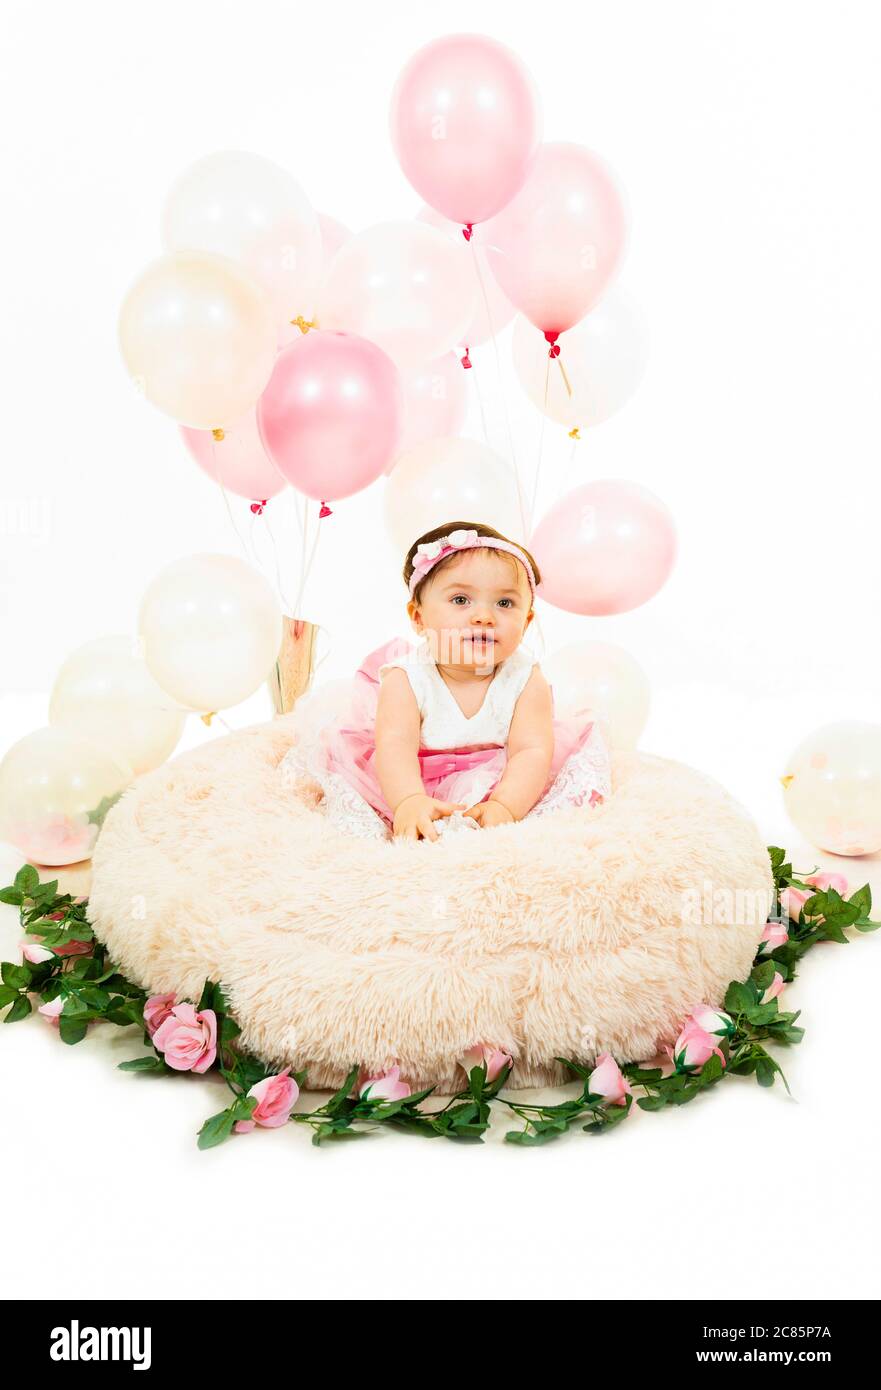 Vertical lifestyle portrait of a baby girl on her first birthday. Stock Photo